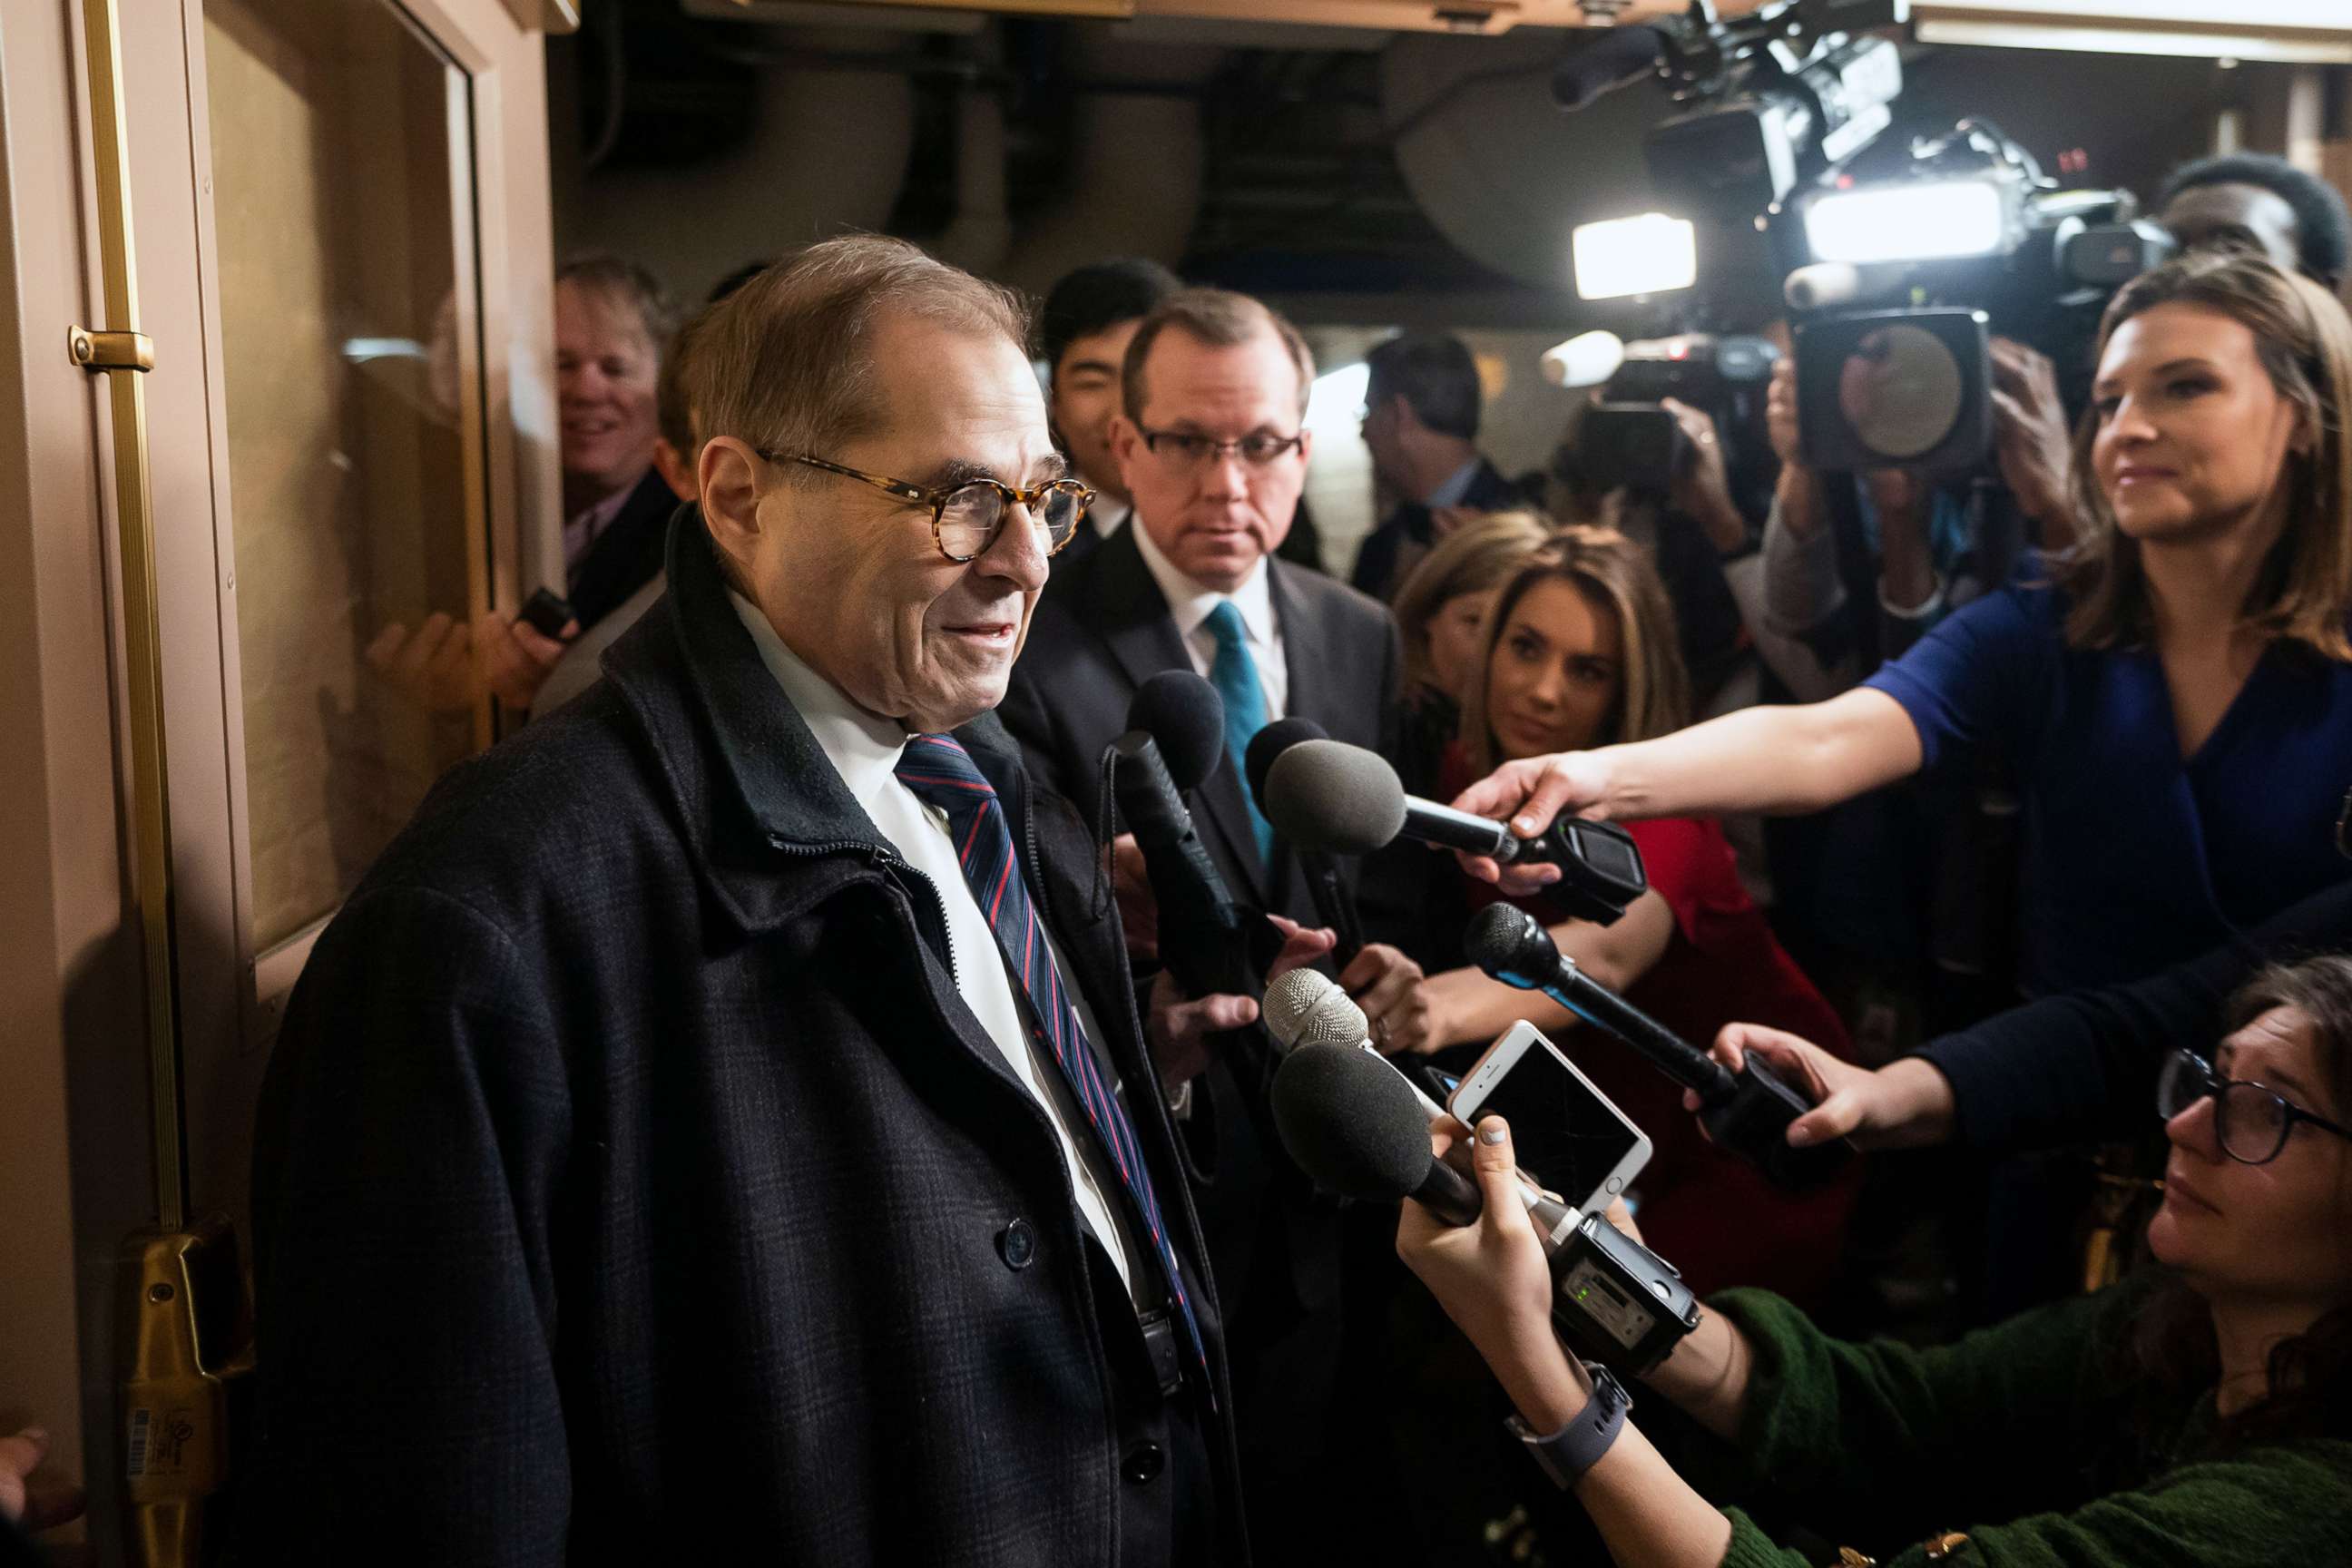 PHOTO: Democratic Representative from New York Jerry Nadler arrives to attend a Democratic caucus meeting on Capitol Hill in Washington, D.C., Jan. 14, 2020.